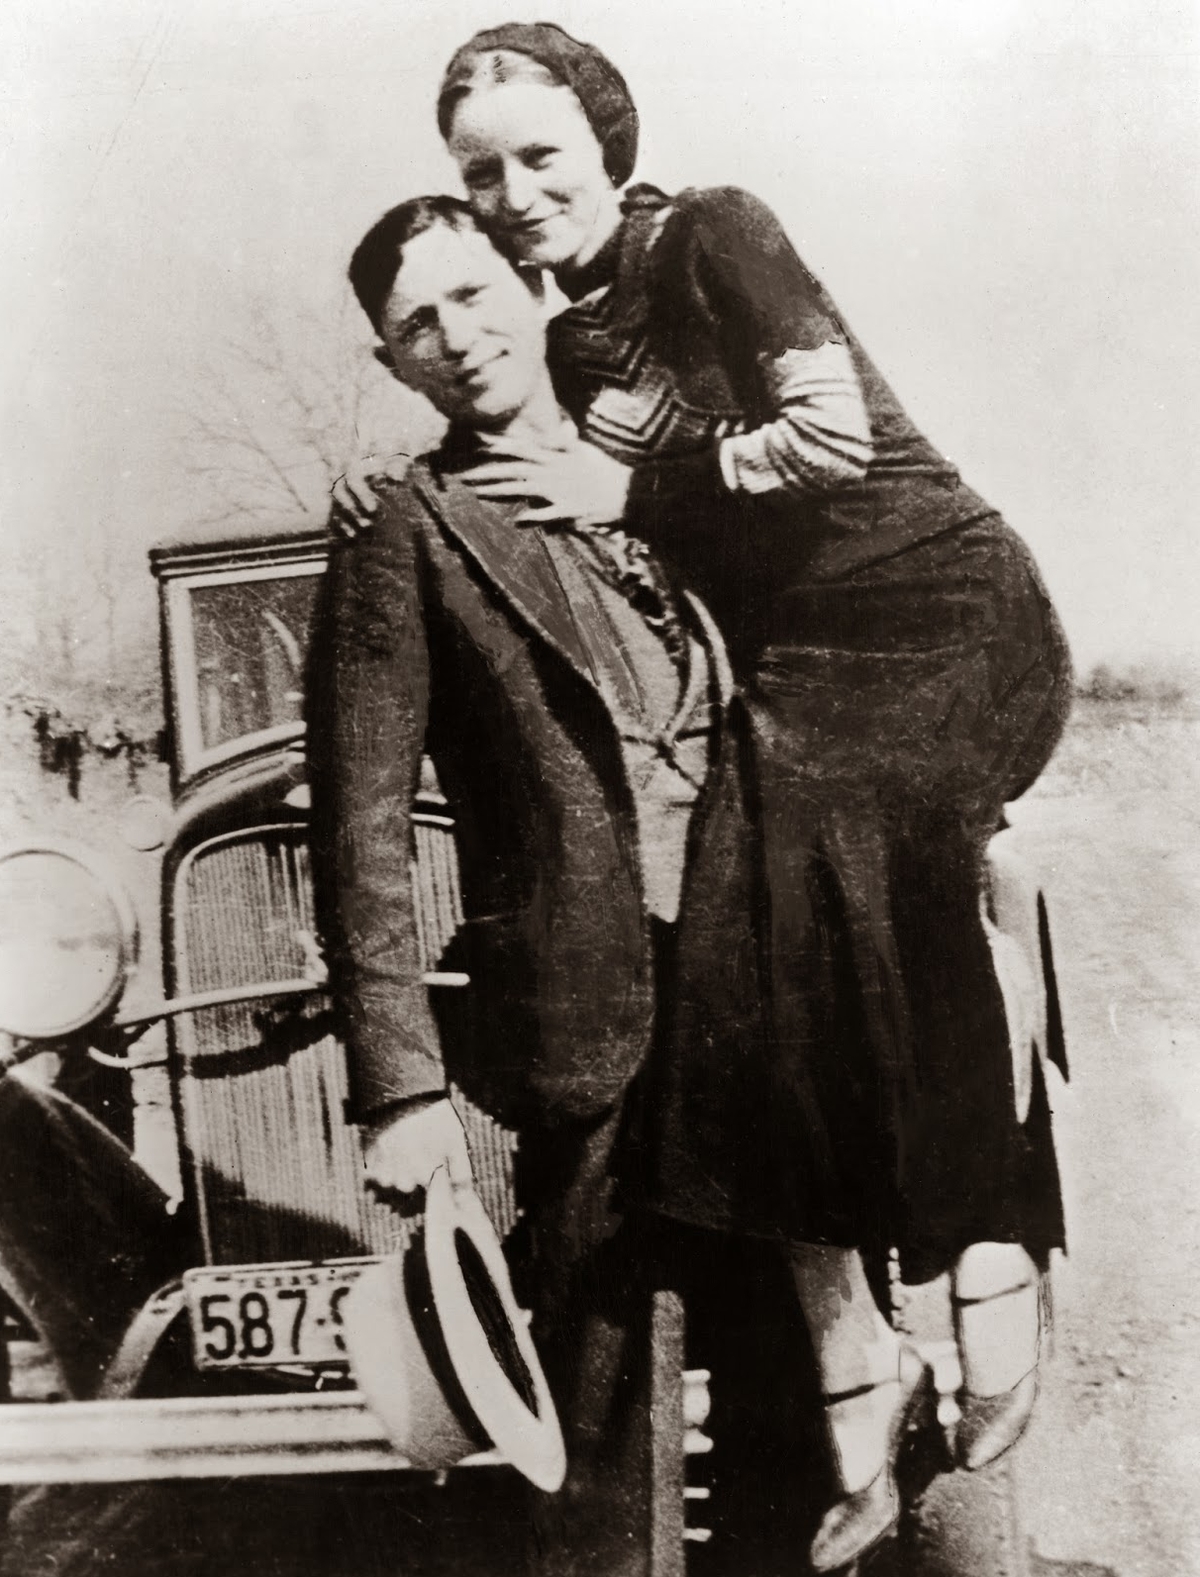 Clyde Barrow and Bonnie Parker